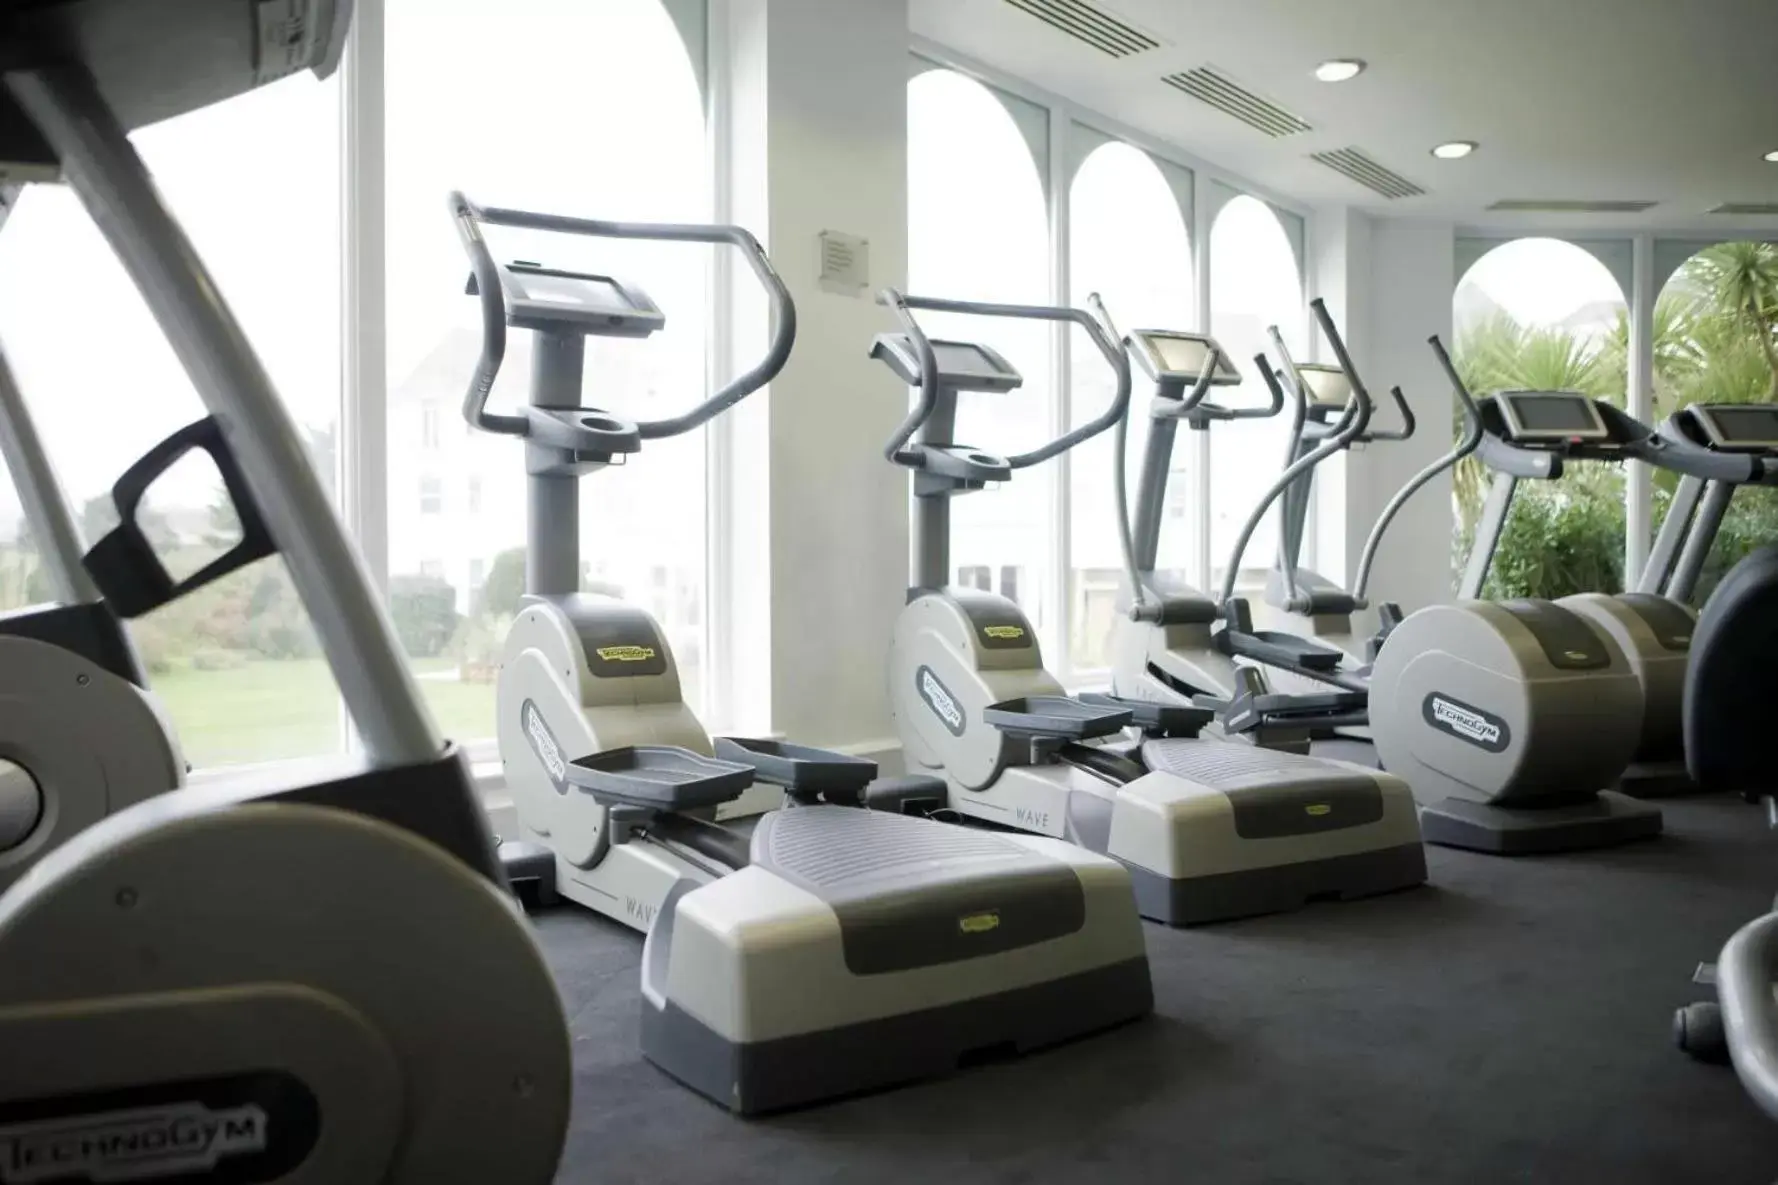 Fitness centre/facilities, Fitness Center/Facilities in Royal Bath Hotel & Spa Bournemouth